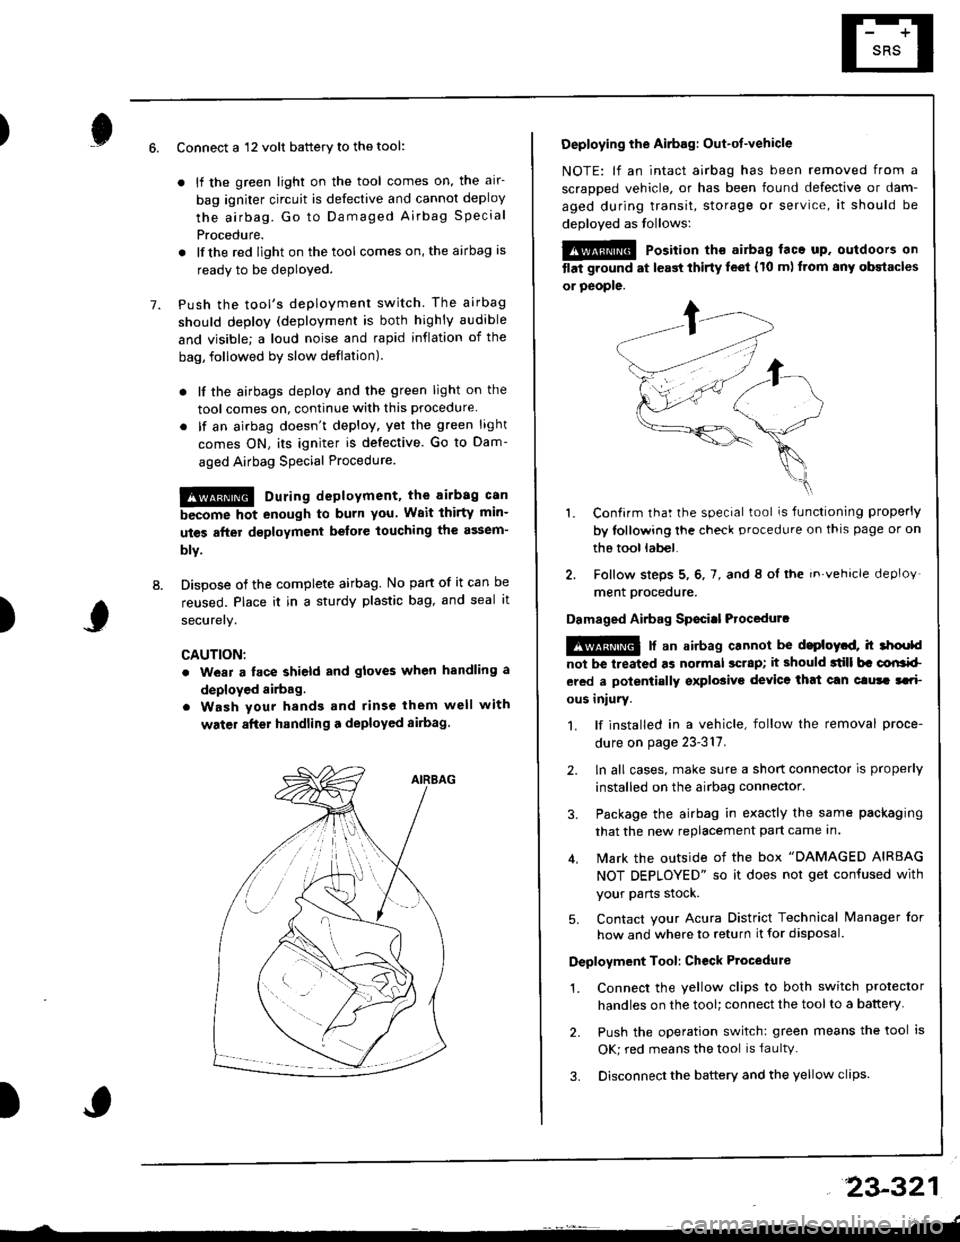 HONDA INTEGRA 1998 4.G Owners Manual )6.
7.
8.
Connect a 12 volt battery to the tool:
. lf the green light on the tool comes on, the alr-
bag igniter circuit is defective and cannot deploy
the airbag. Go to Damaged Airbag Specia I
Proced